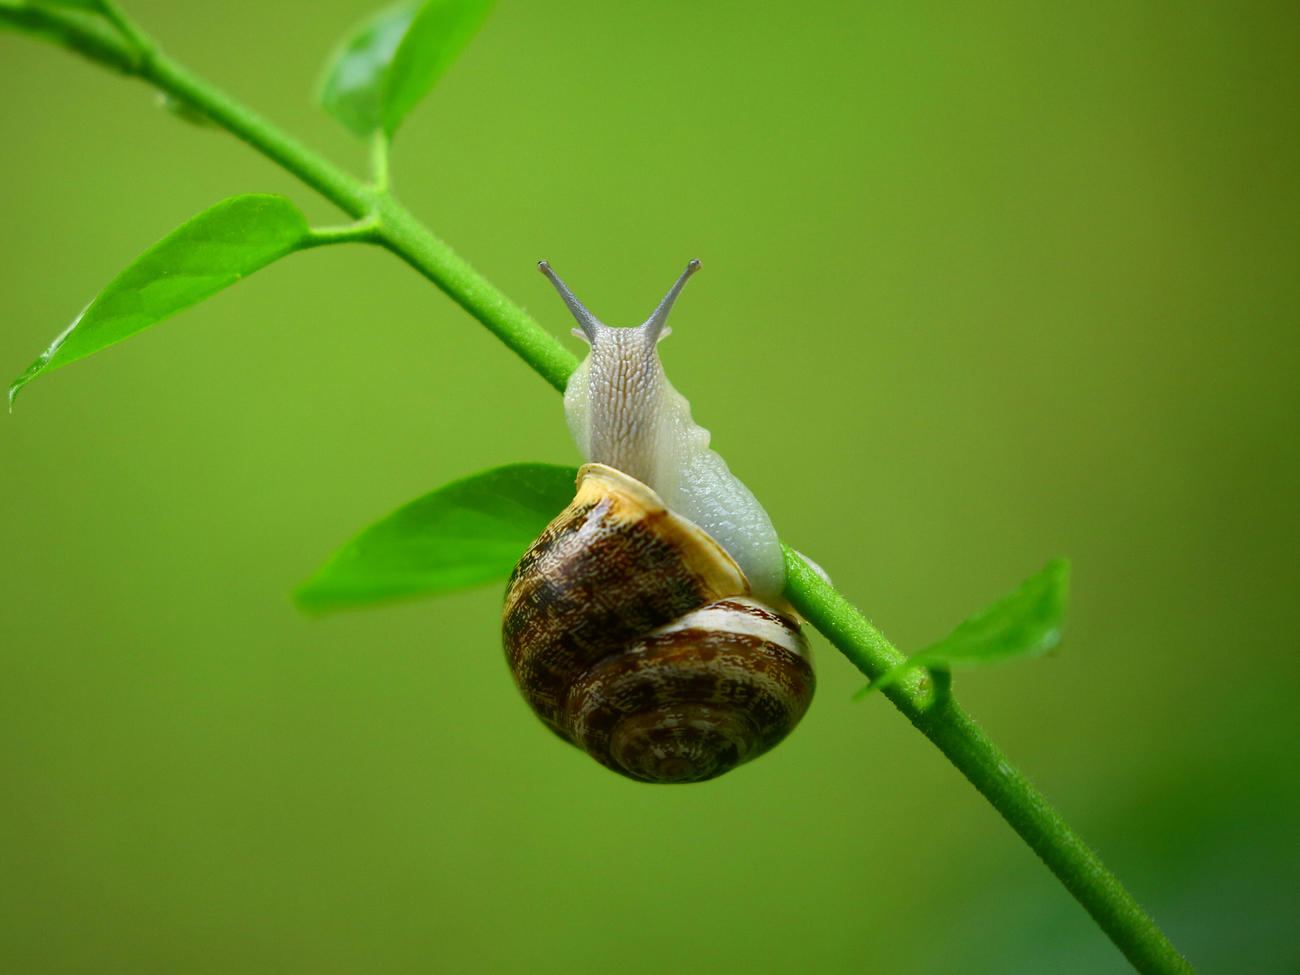 Top Tips to Keep Plants Safe from Garden Pests